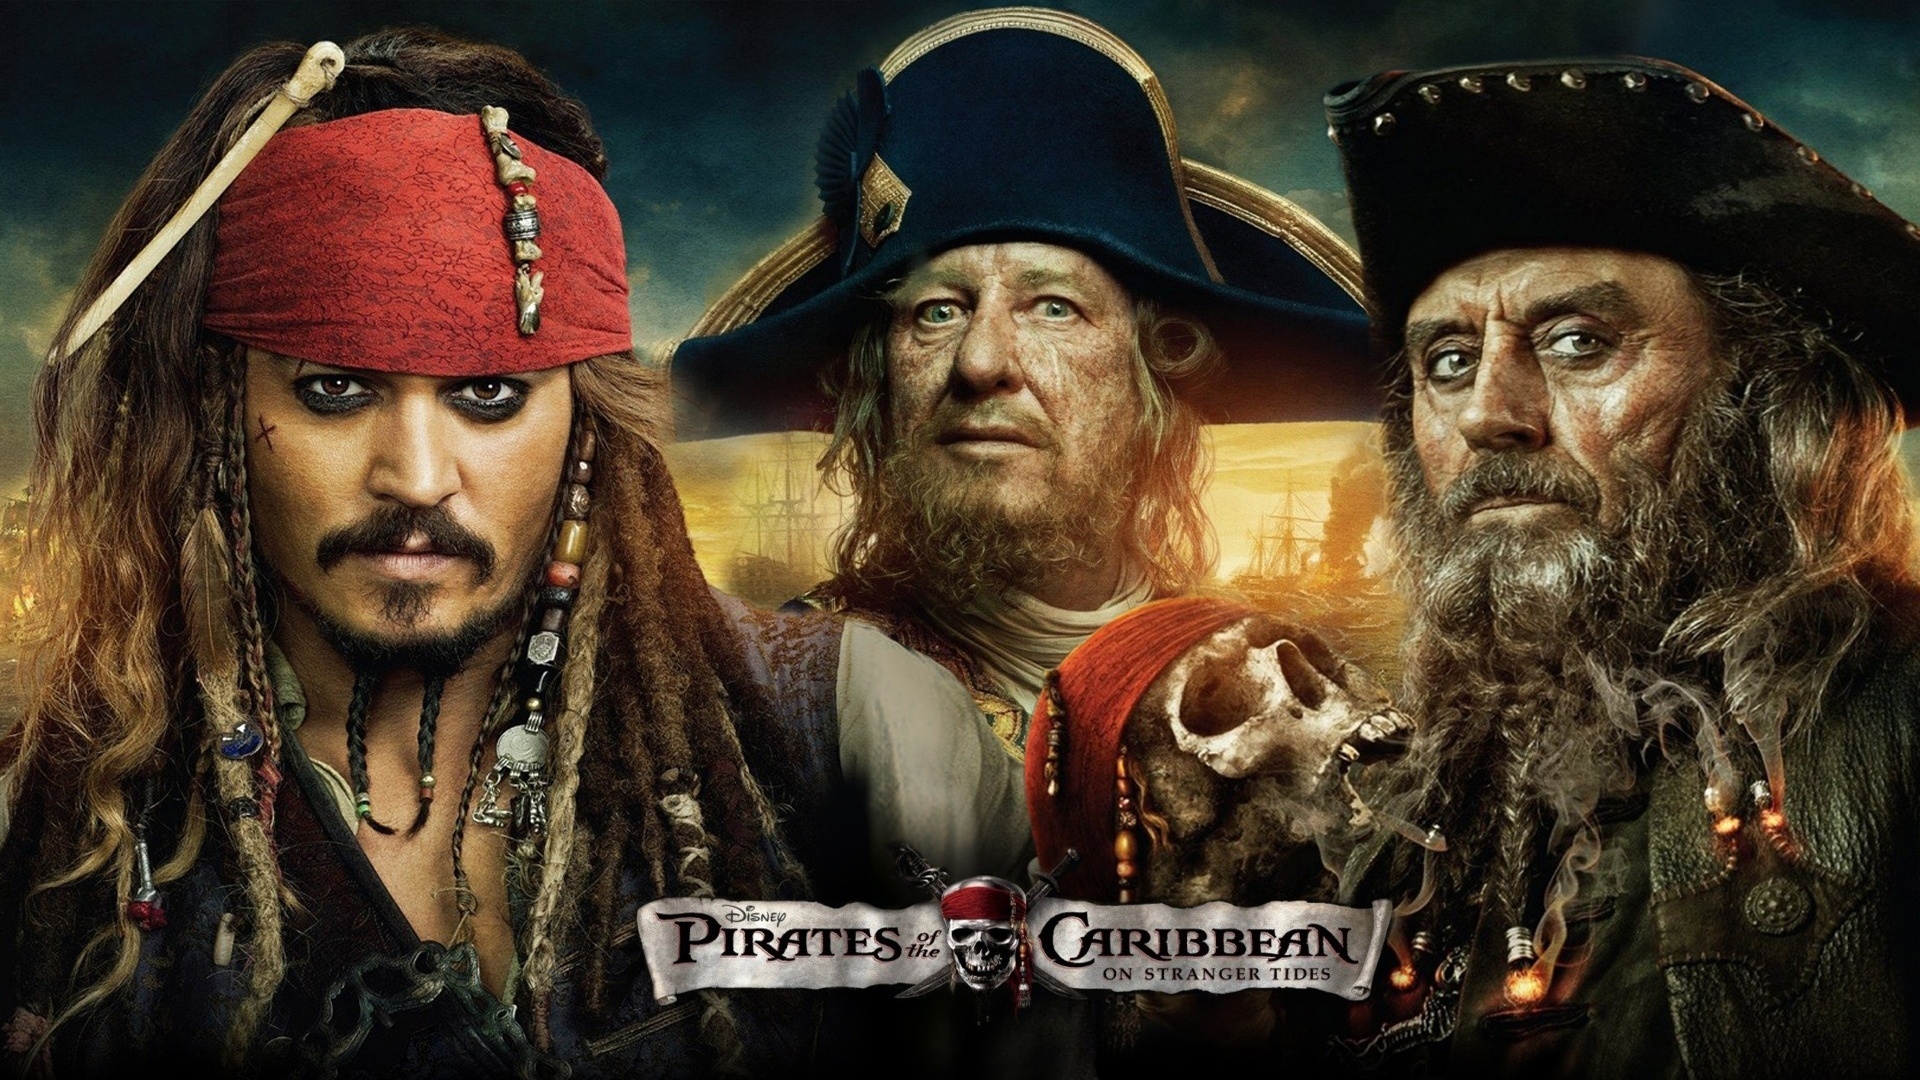 Pirates Caribbean 4 for 1920 x 1080 HDTV 1080p resolution